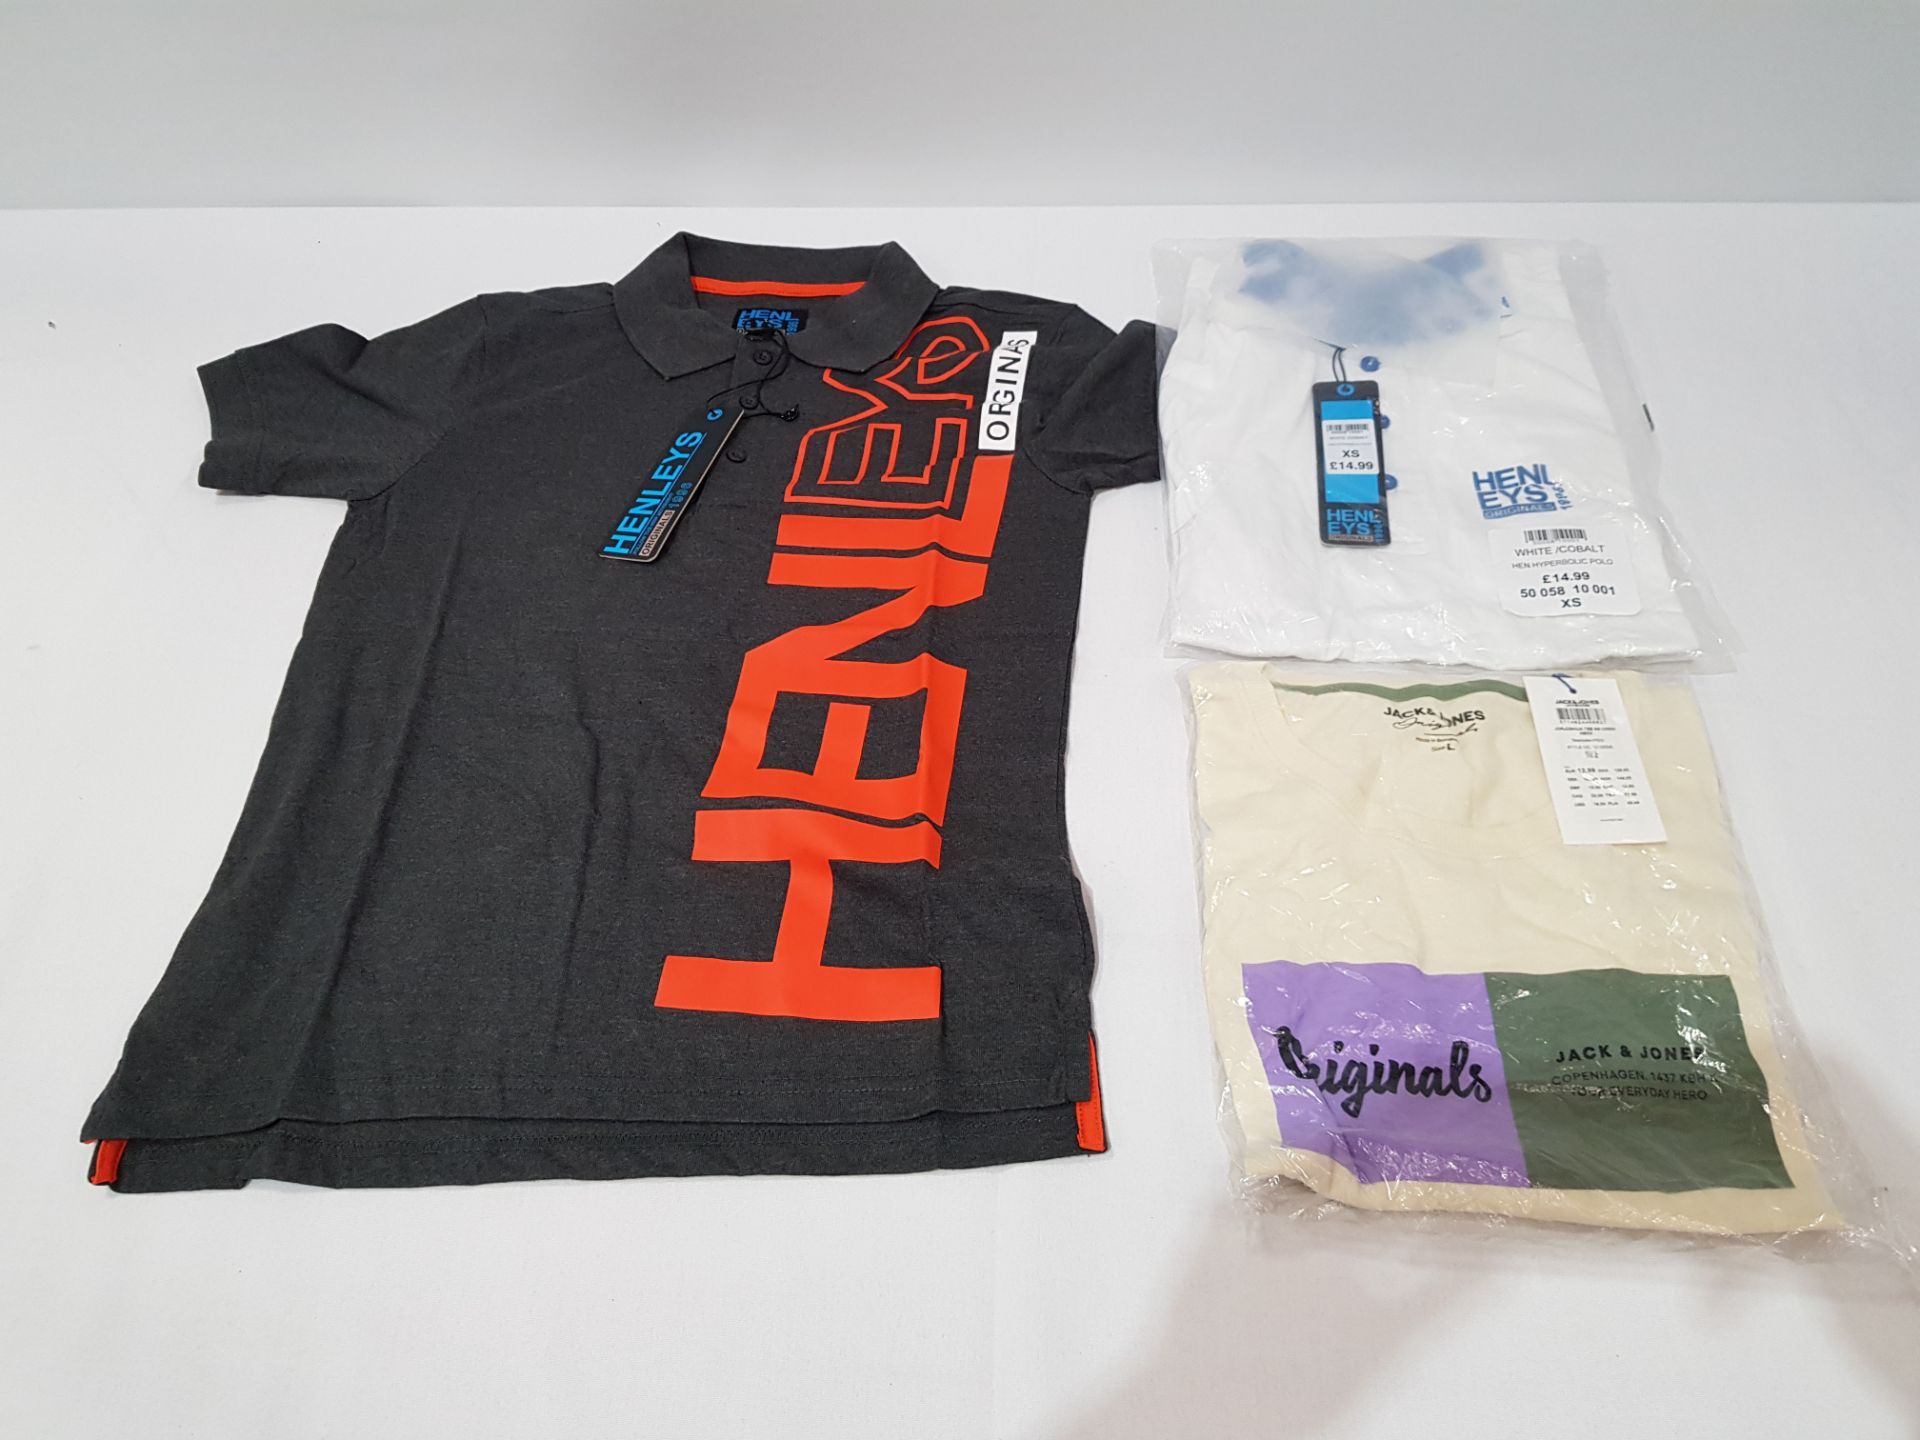 22 X BRAND NEW MIXED LOT CONTAINING 12 HENLEYS DESIGNER POLO PK T-SHIRTS IN SIZE XS- 6 IN GREY- 6 IN